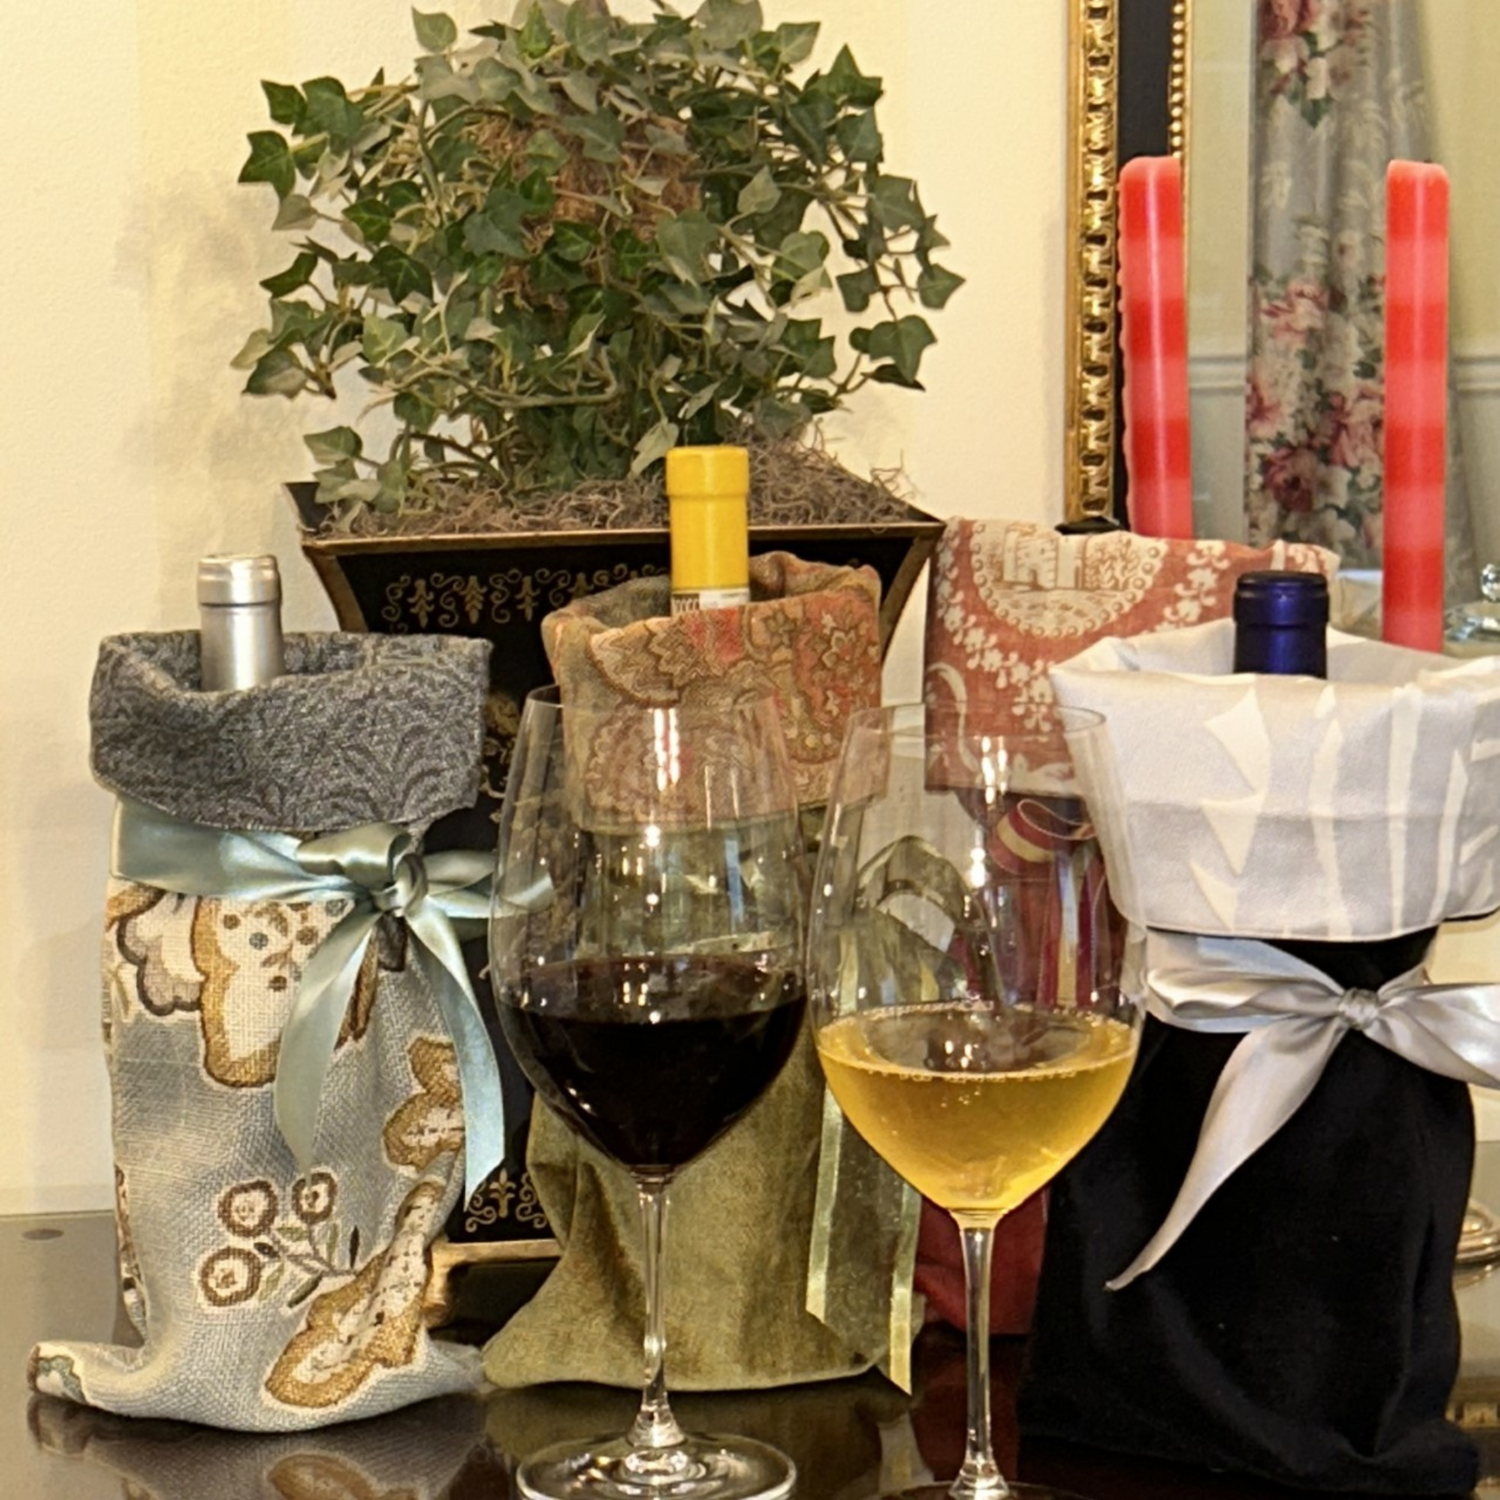 Our Wine Gift Bags are a wonderful example of thoughtful upcycling.  Solids and prints are combined to create a beautiful gift bag with a contrasting cuff and ribbon ties. 